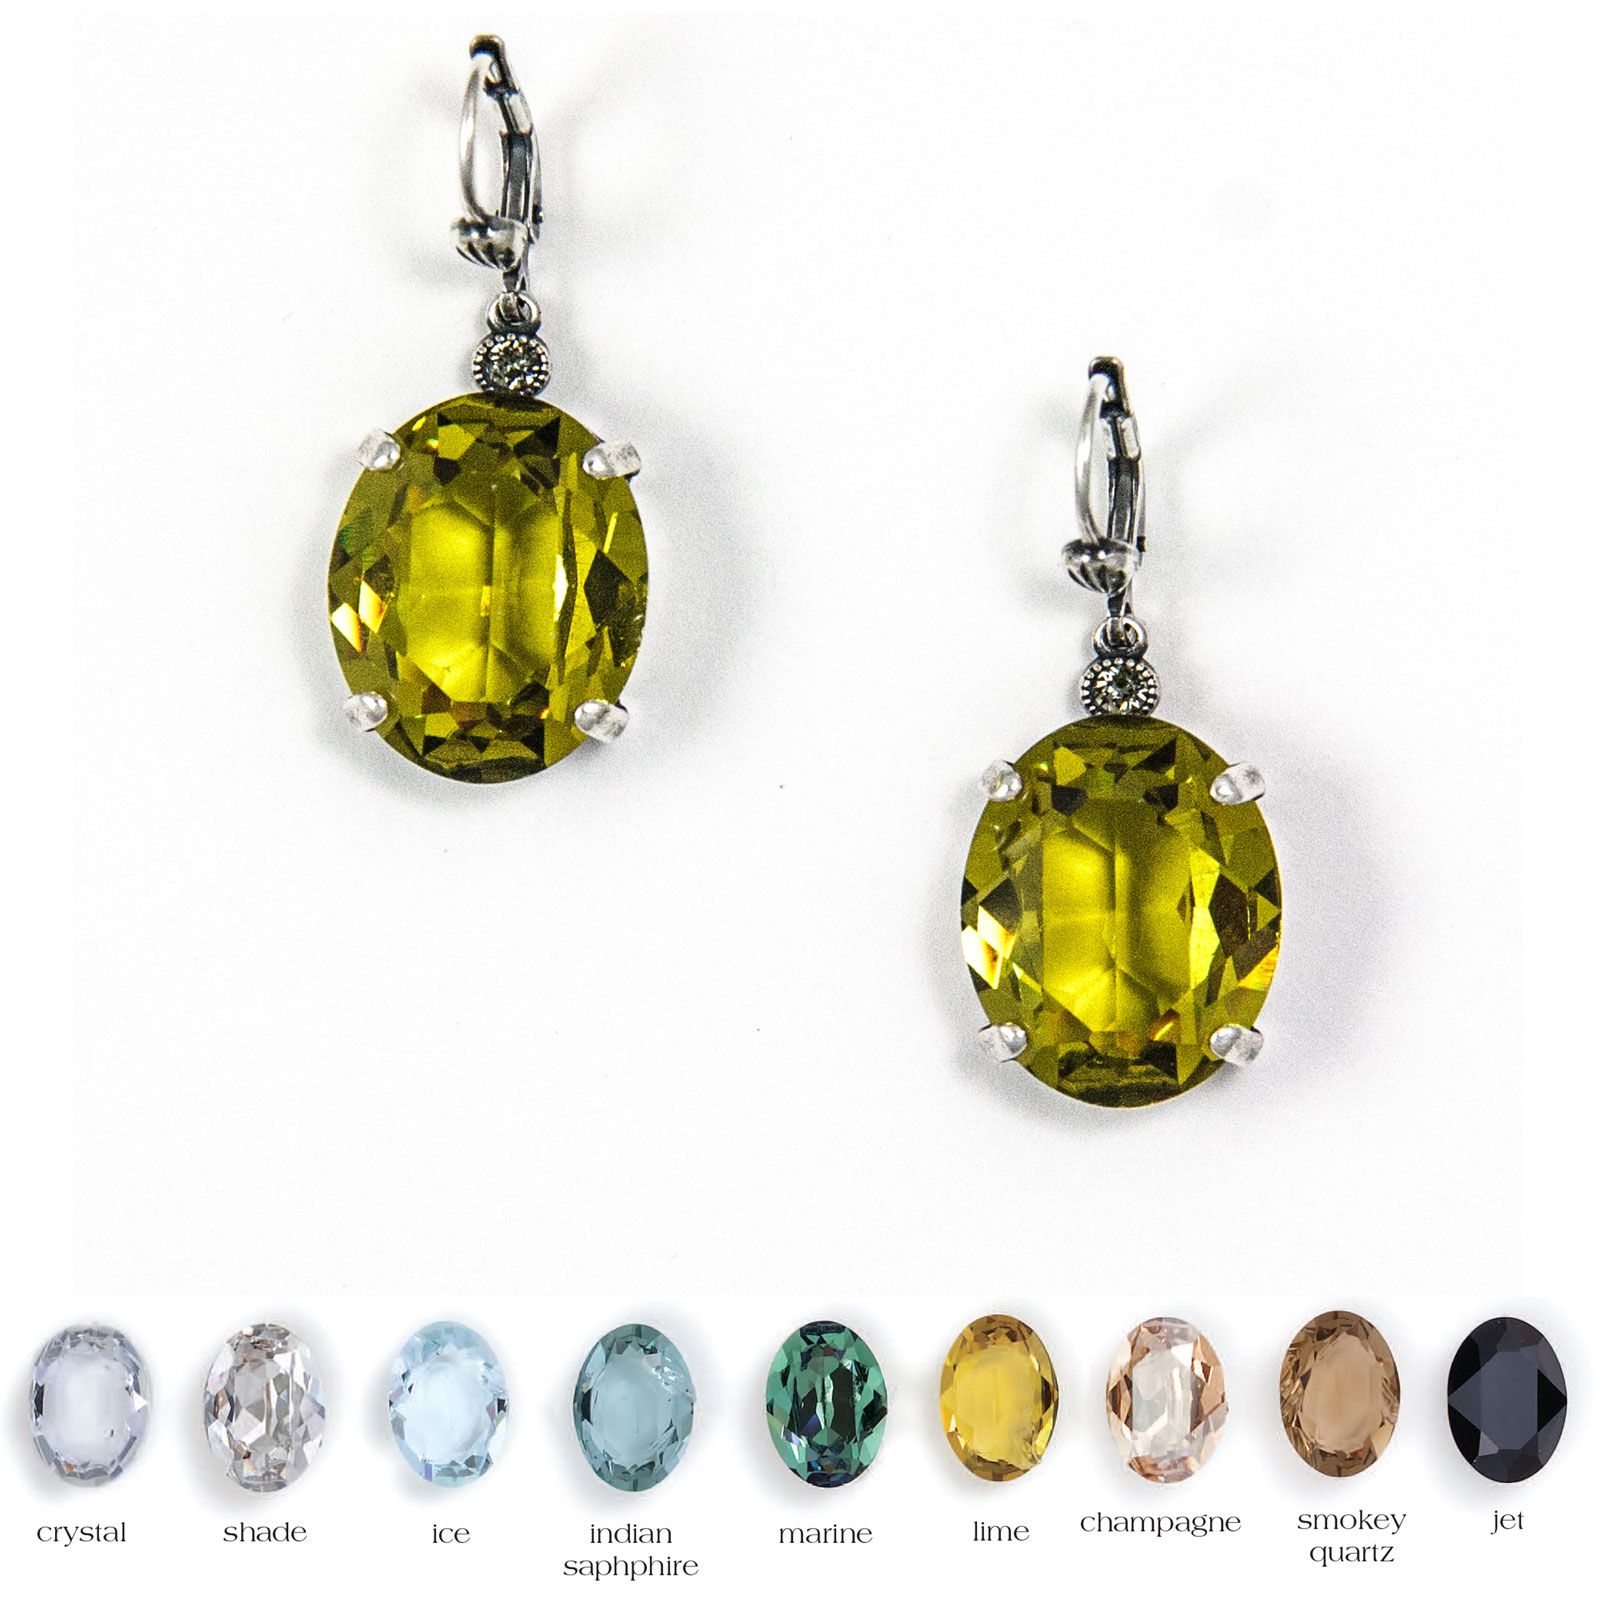 Catherine Popesco 3 Stone Crystal Earrings - Assorted Colors